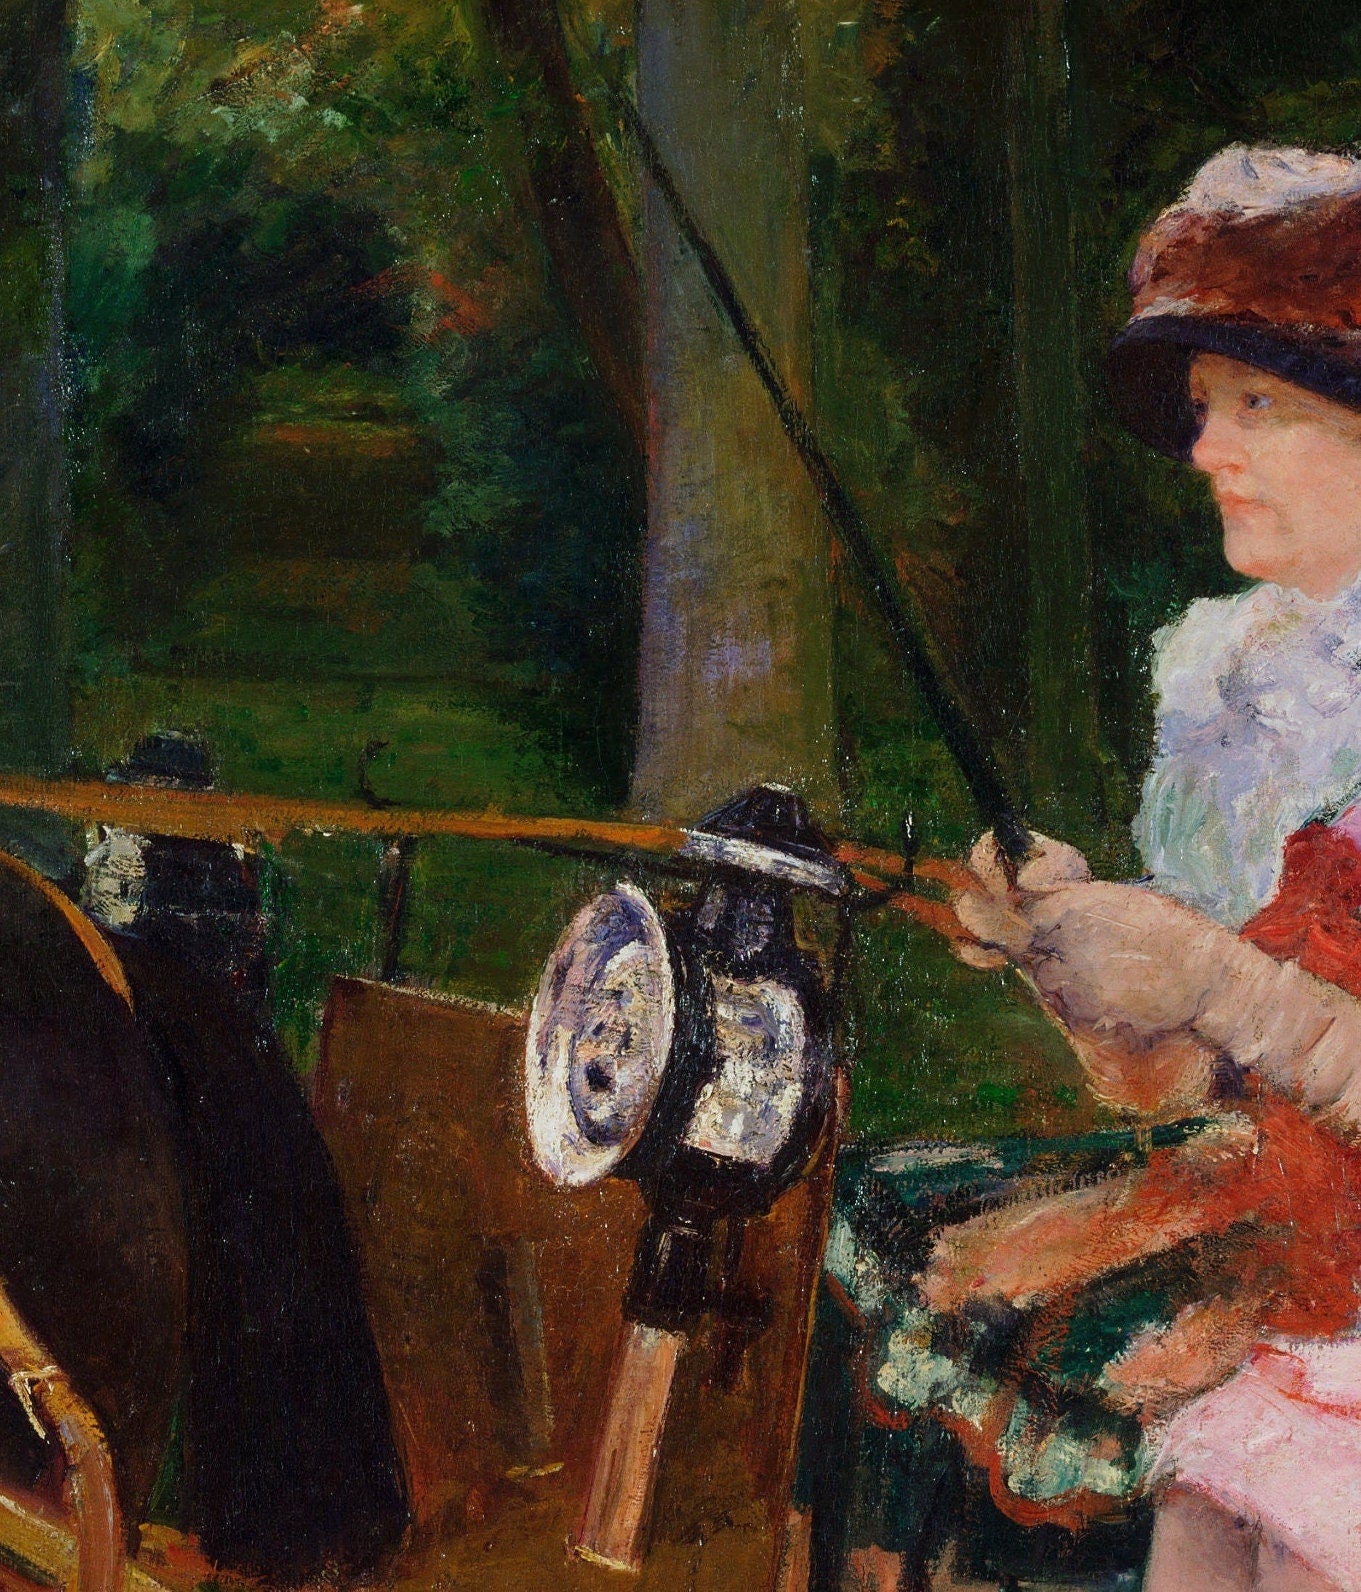 A Woman and a Girl Driving by Mary Cassatt çerçeve, 3d Printed with texture and brush strokes looks like original oil-painting, code:798